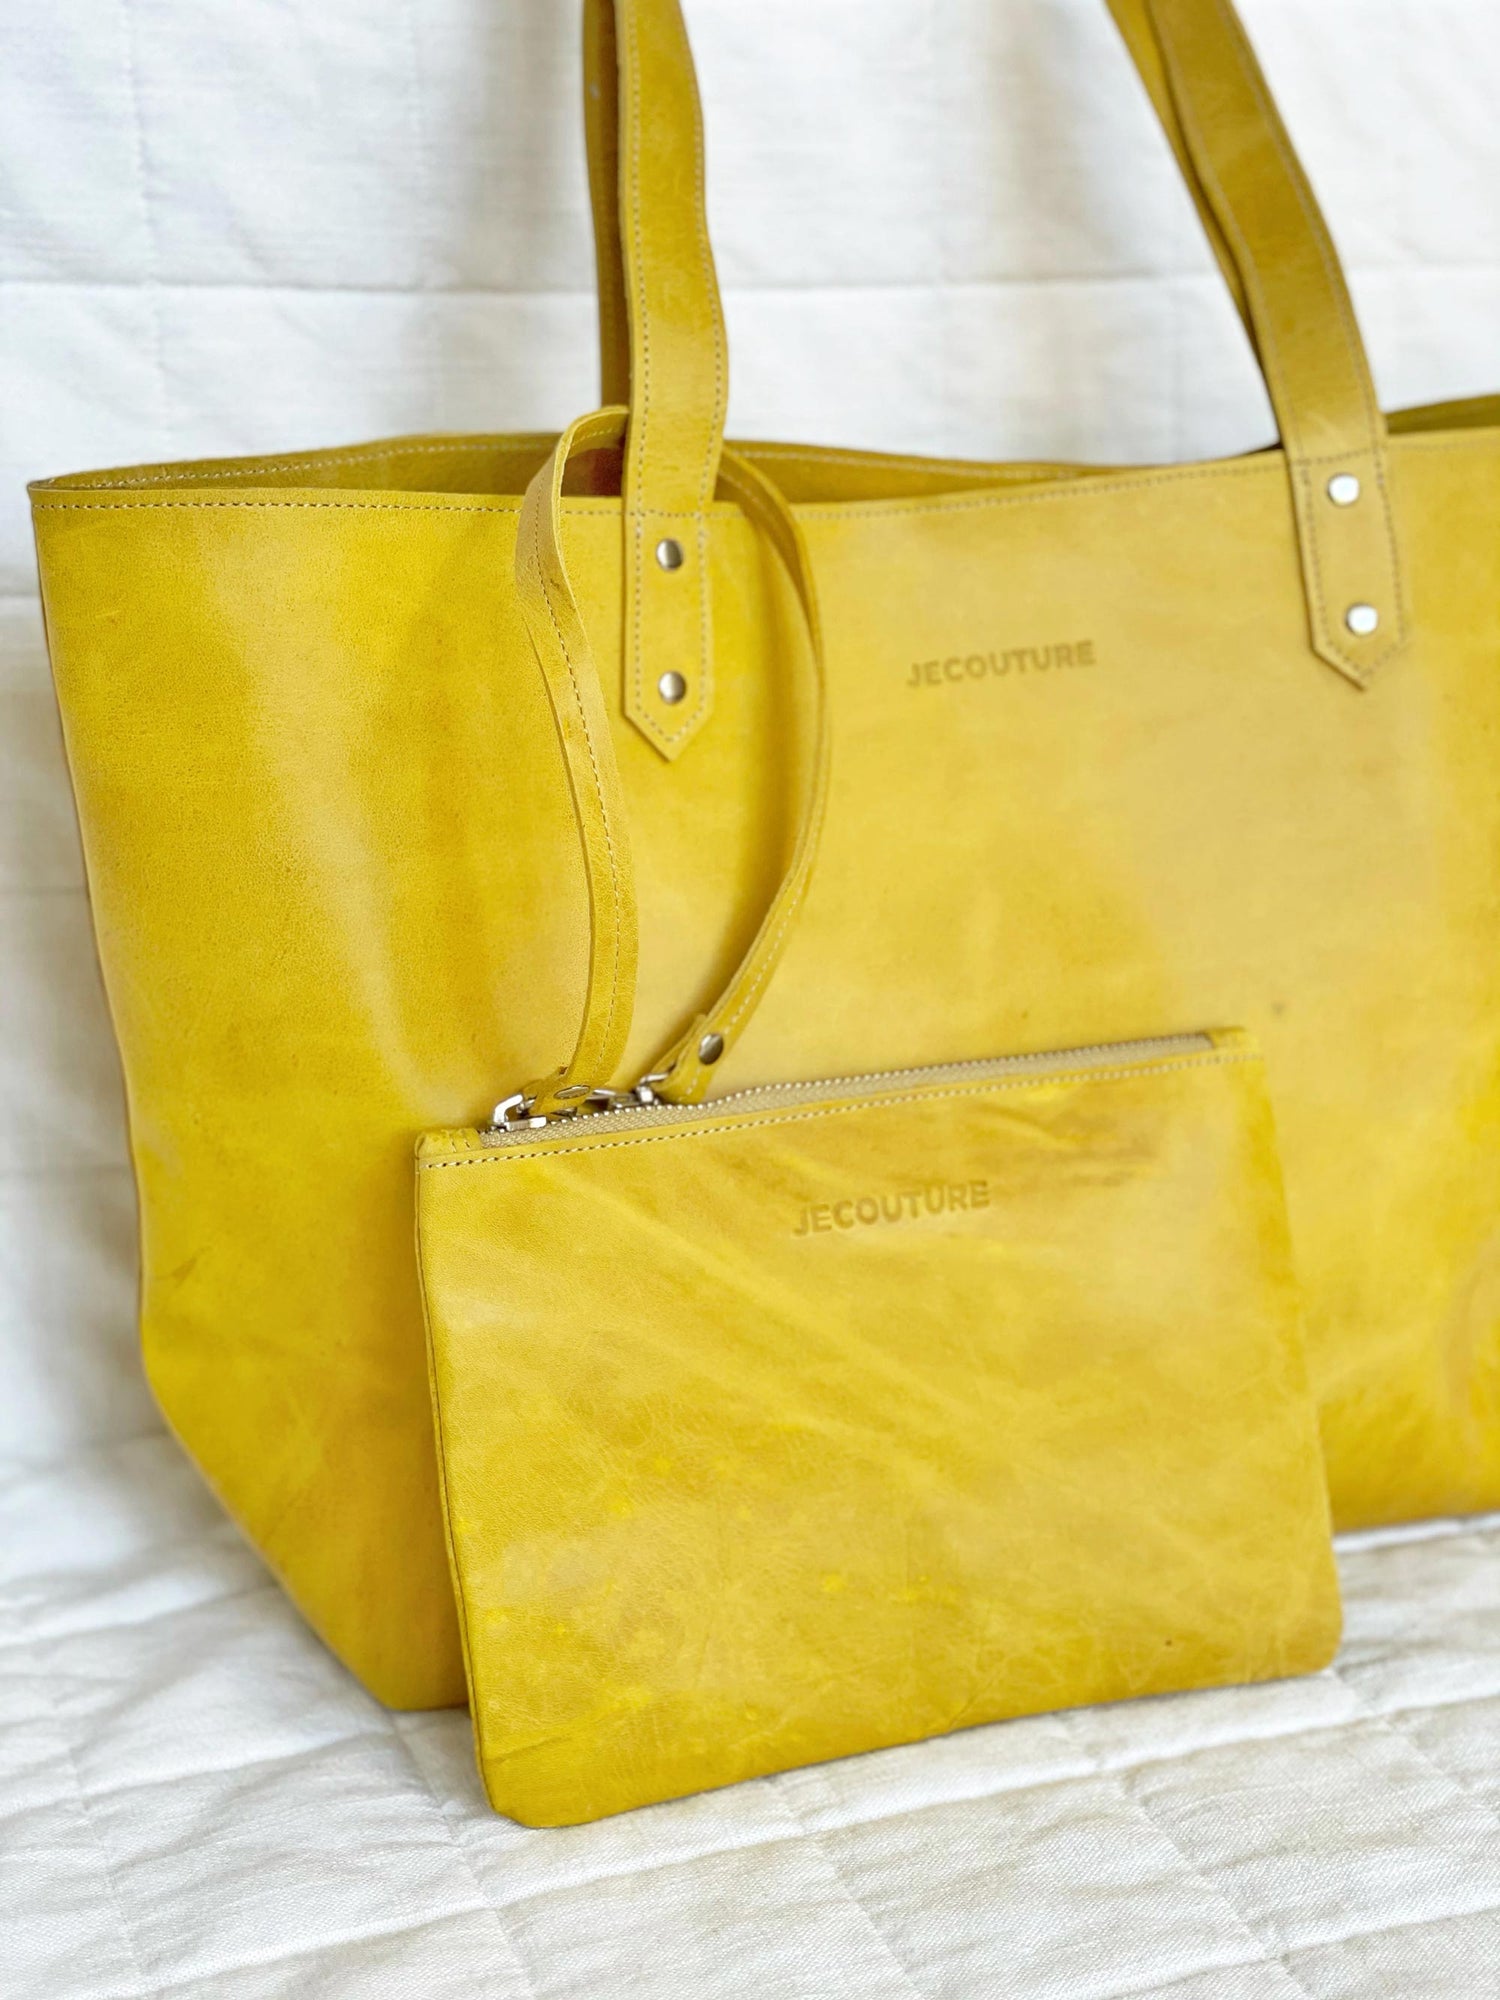 Je Couture - Tote Bag Yellow